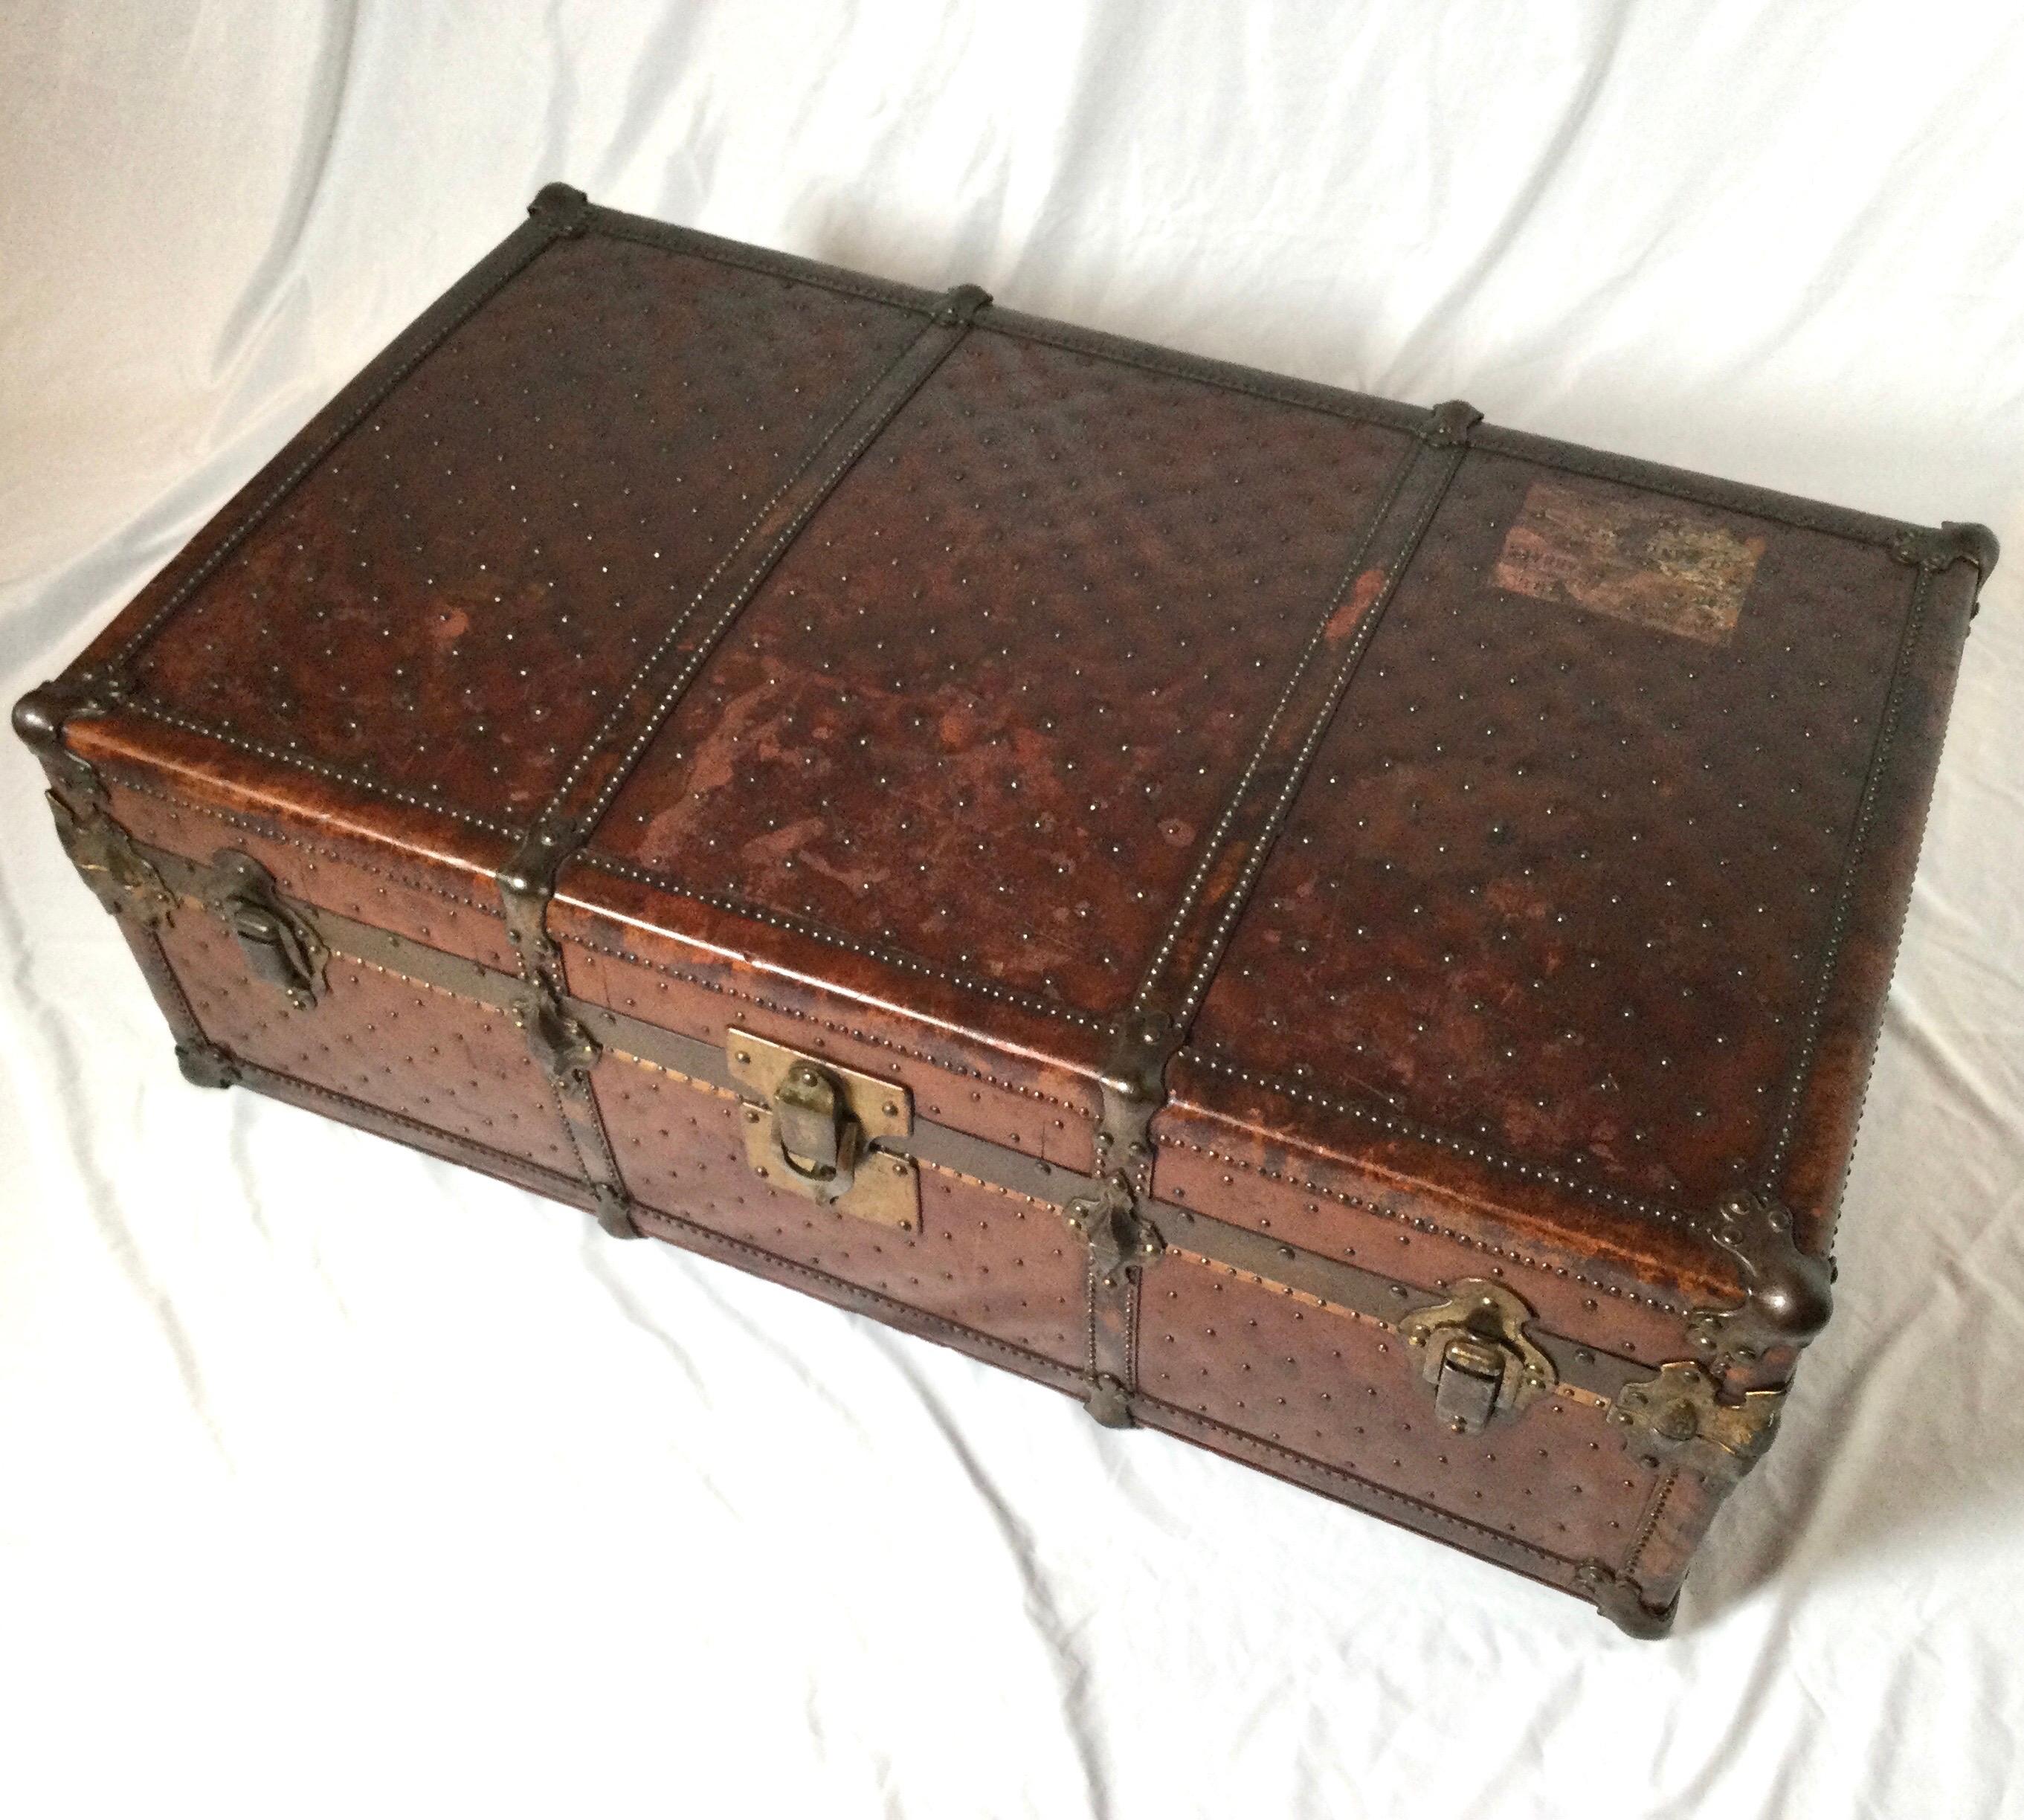 A 19th century Italian leather trunk with metal studs decorating the exterior, original riveted hardware, linen interior, brass hinges. There are remnants of two decals from travel.